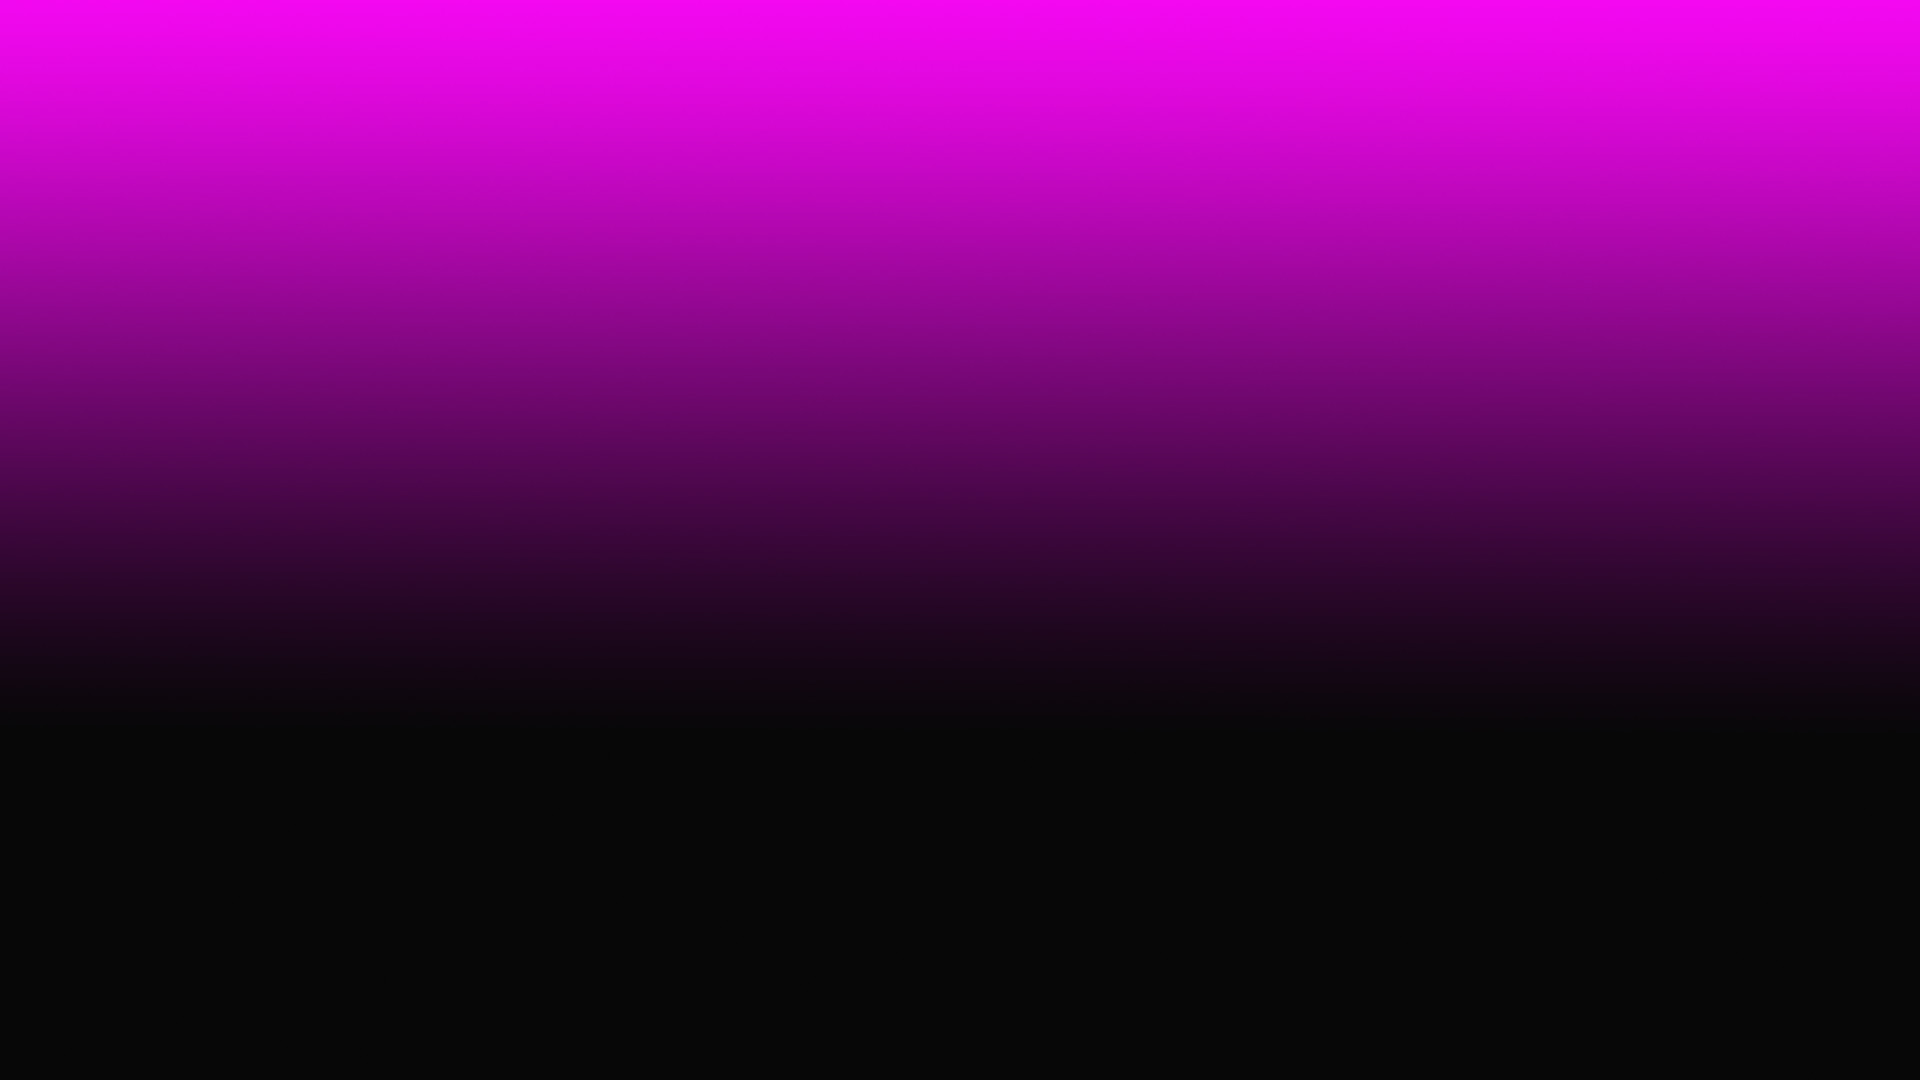 1920x1080 Pink And Black HD Backgrounds.